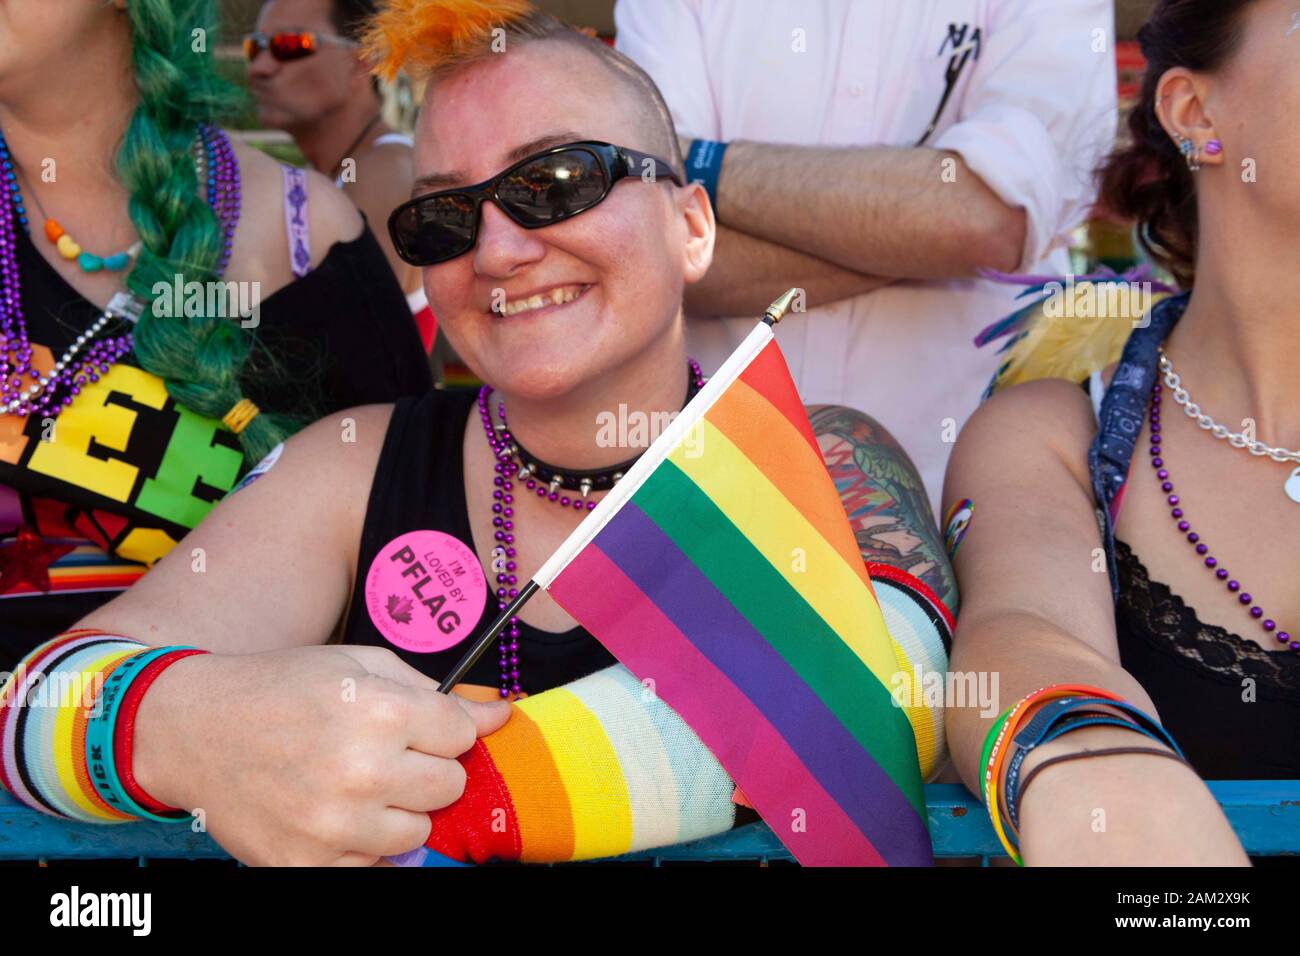 Cheerful Pride parade participant with rainbow flag, Vancouver Pride Festival 2014, Vancouver, Canada Stock Photo